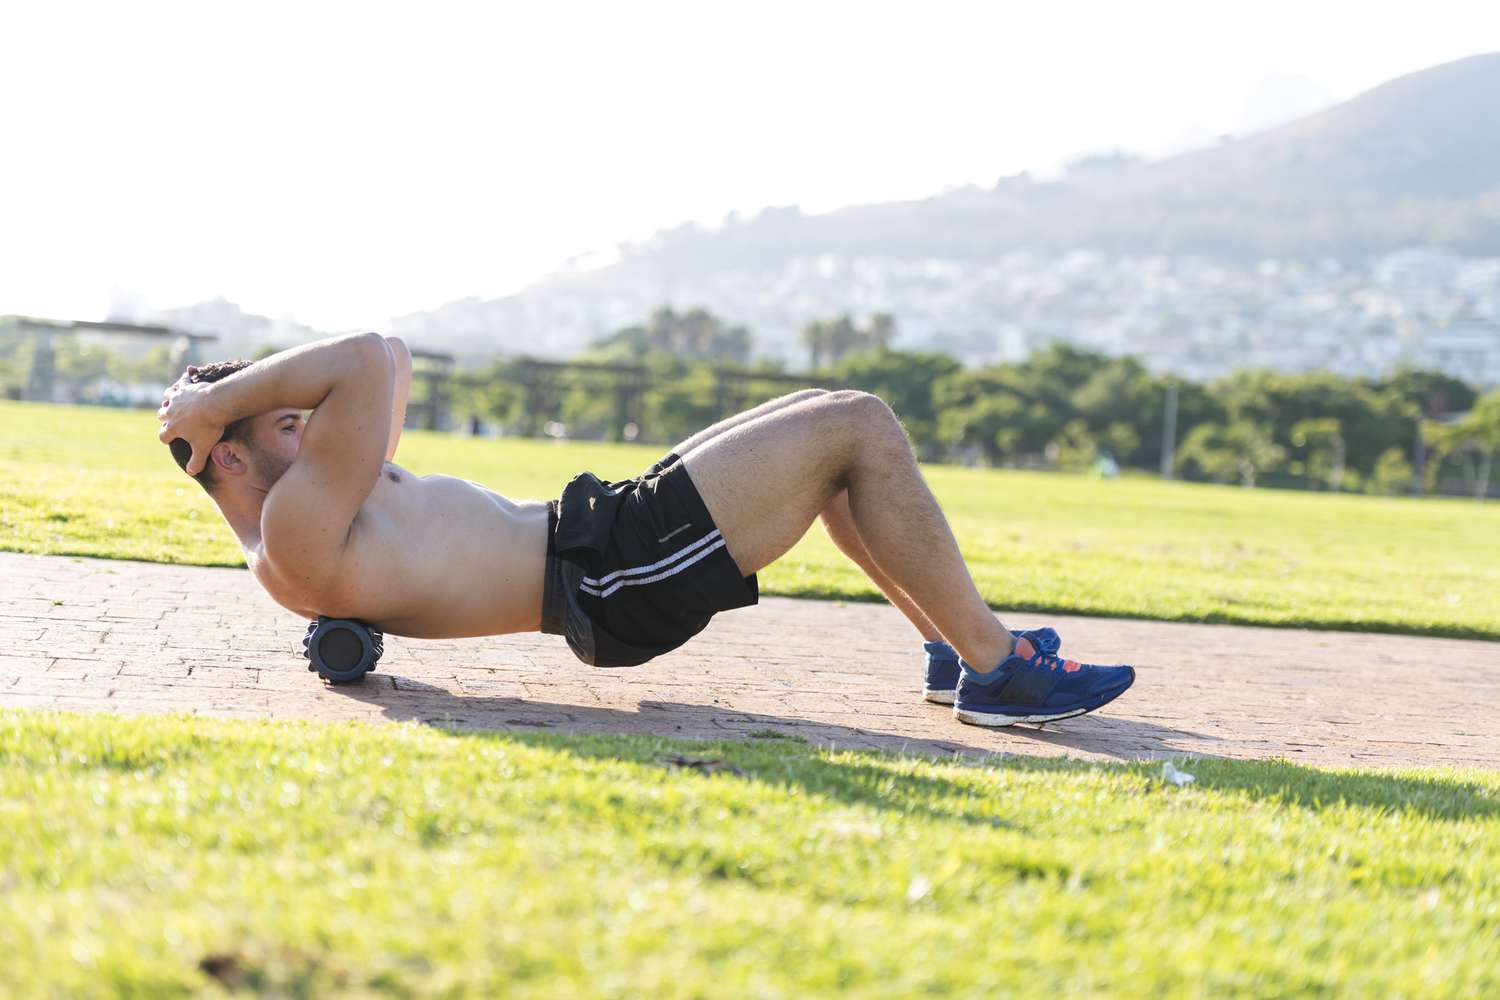 A young man performing exercises on a foam roller outdoors in a lush mountain area.